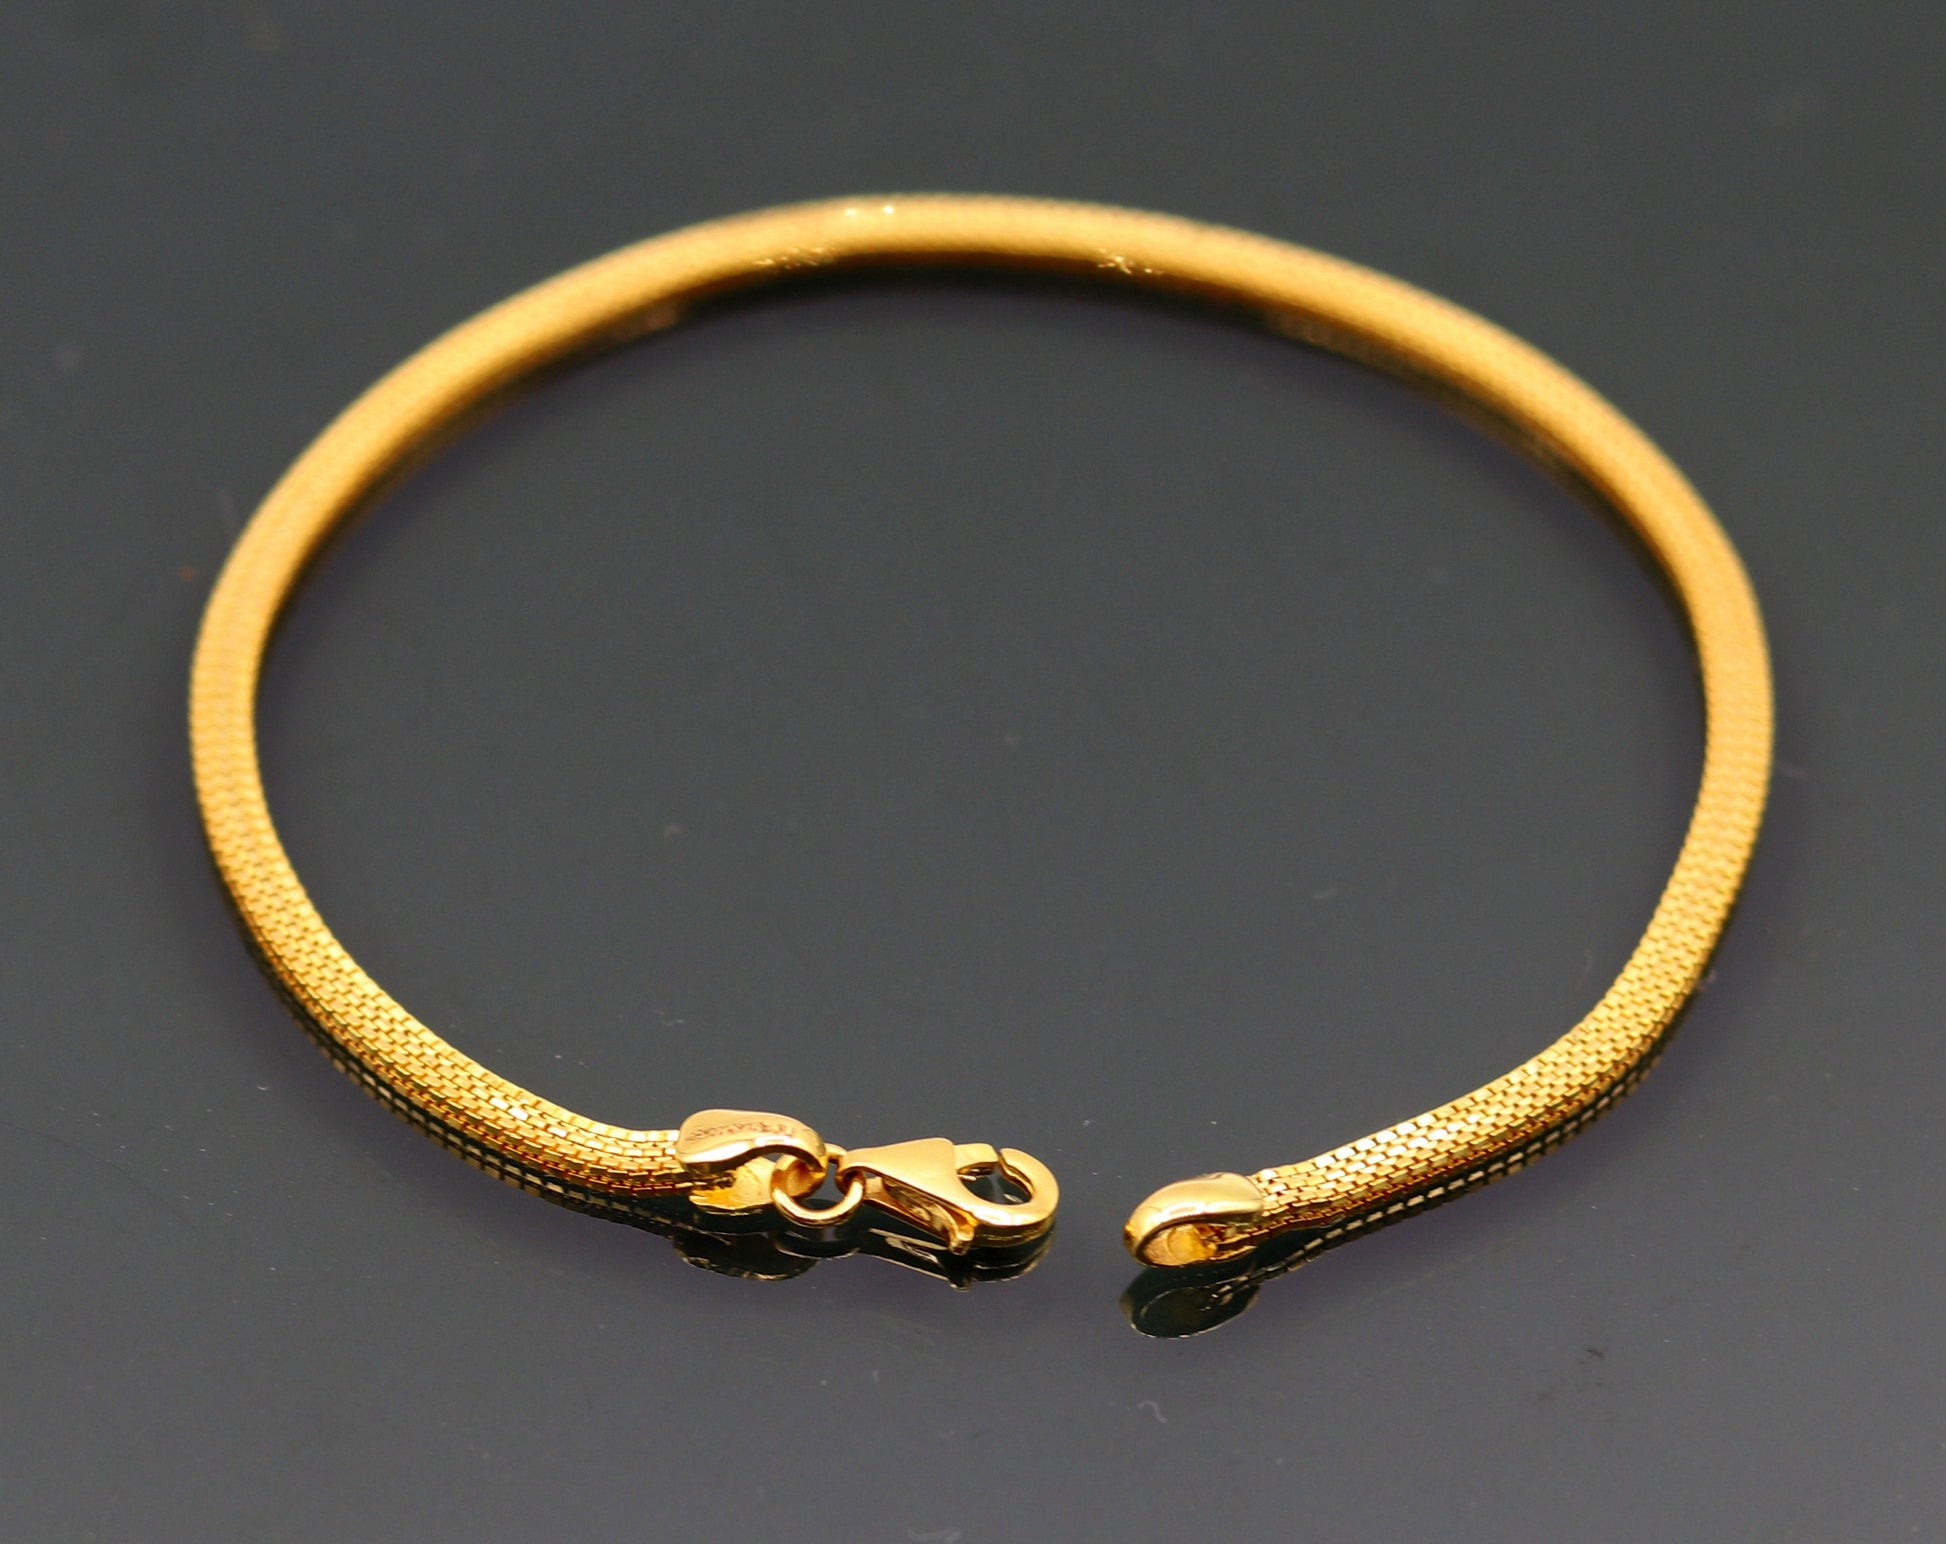 22kt yellow gold handmade highway box chain solid bracelet unisex 91.6% gold purity solid vintage jewelry from rajasthan india - TRIBAL ORNAMENTS